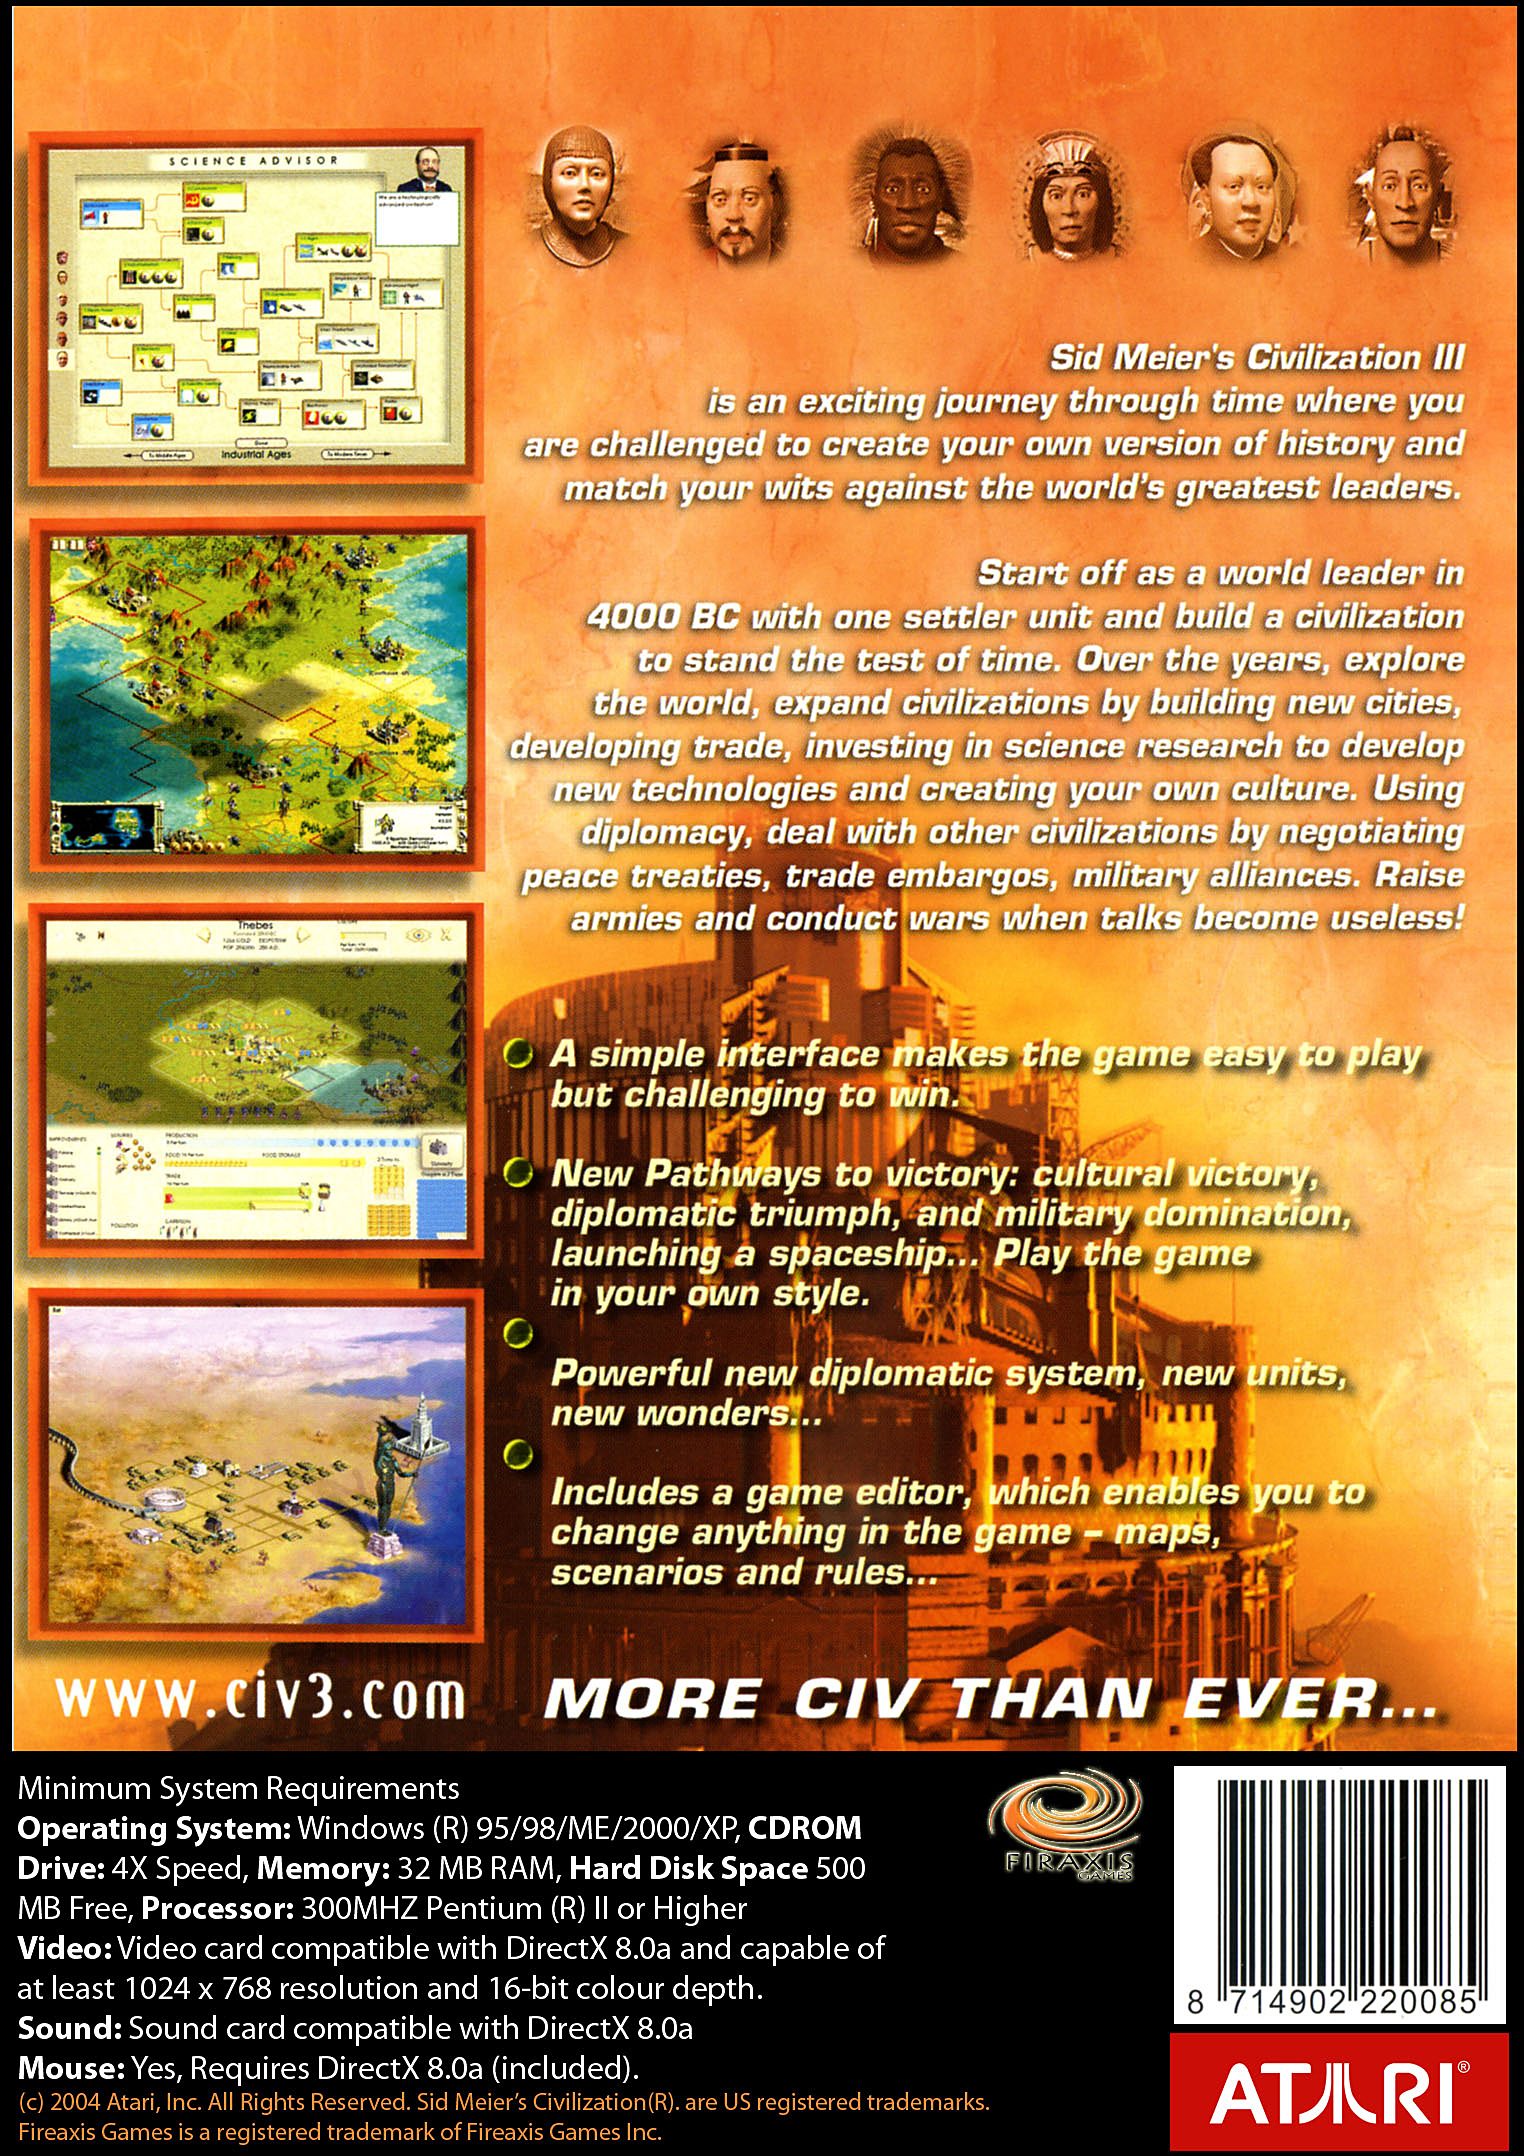 download the new version for ios Sid Meier’s Civilization III